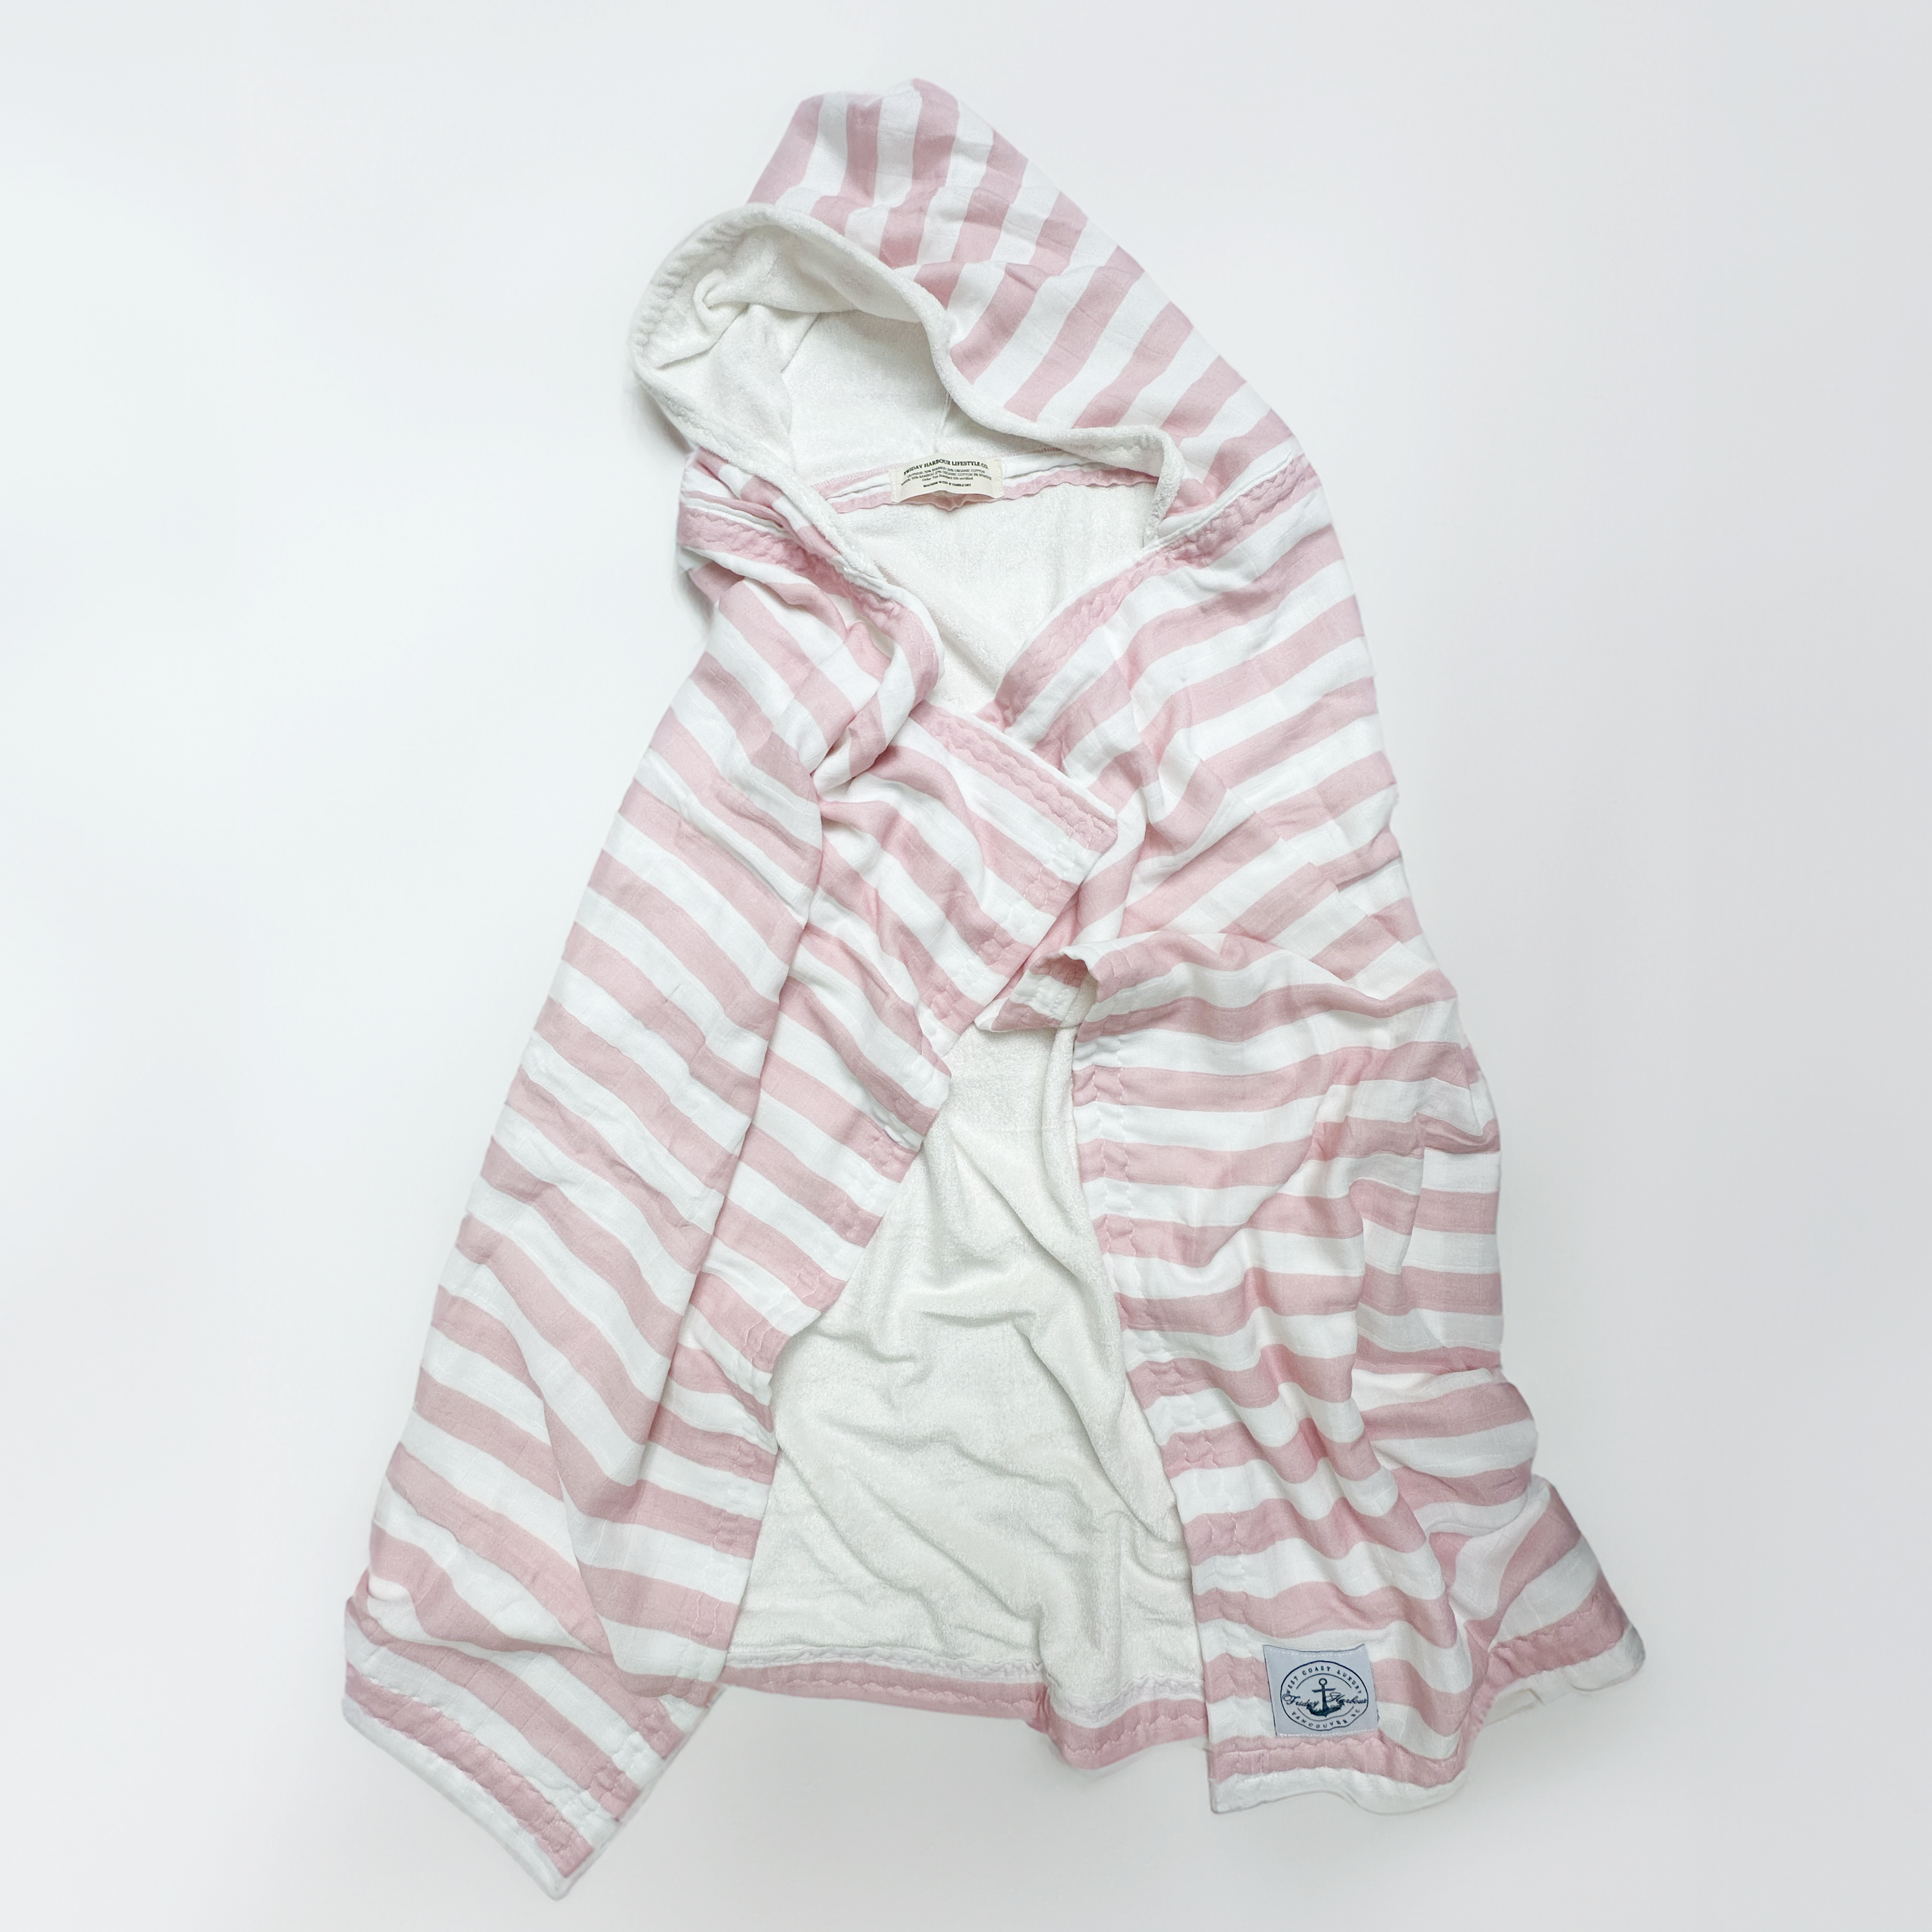 The Kids Cloud Towel - Pink & White Stripe - Friday Harbour Lifestyle Company 